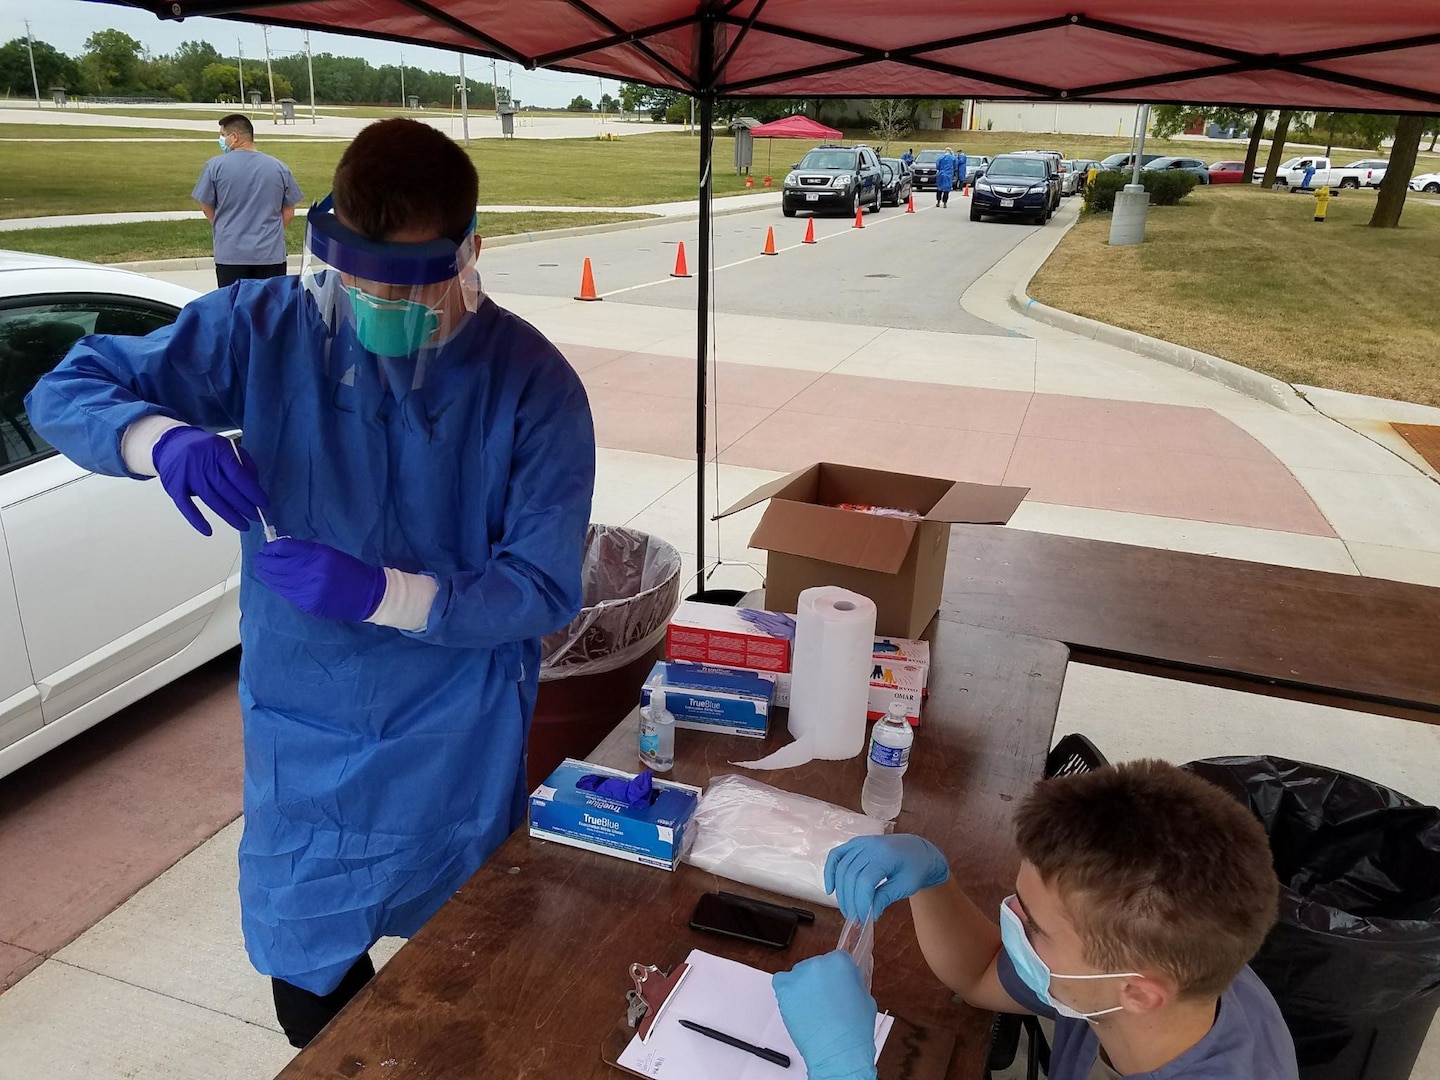 Citizen-Soldiers and Citizen-Airmen from the Wisconsin National Guard collect specimens for COVID-19 testing Sept. 1, 2020, at the Waukesha County Expo Center in Waukesha, Wis. The Wisconsin National Guard has multiple COVID-19 specimen collection teams operating throughout the state.